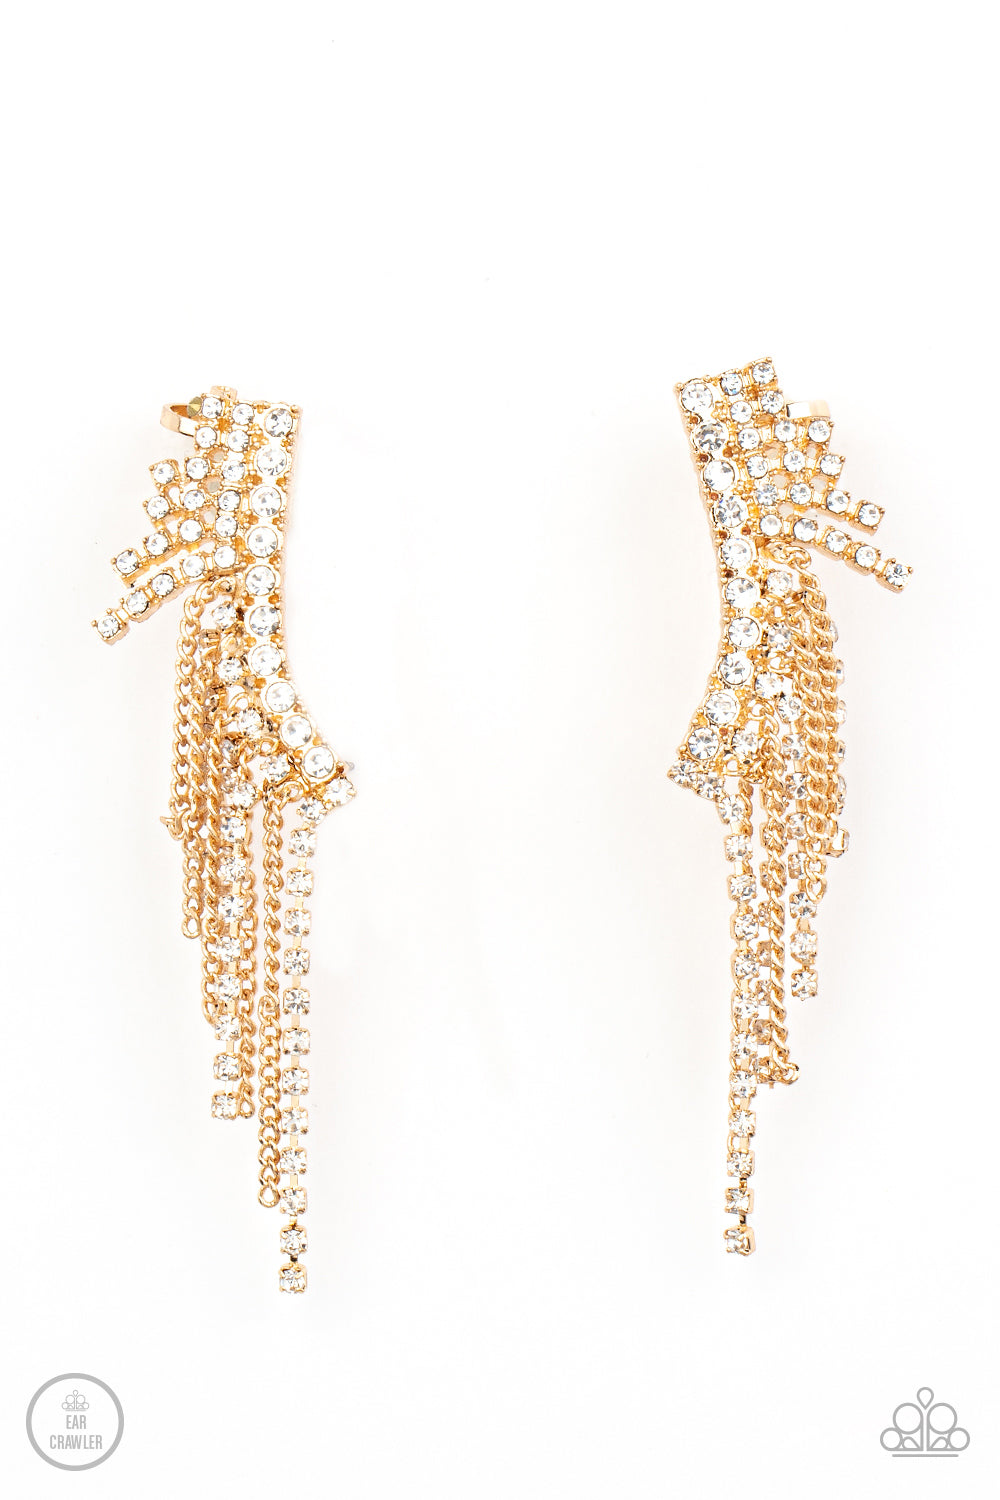 Thunderstruck Sparkle Gold Ear Crawler Earring - Paparazzi Accessories   A tapered fringe of dainty gold chains and glittery strands of white rhinestones cascades from the edge of a curving white rhinestone encrusted frame, creating an edgy centerpiece. Features a clip-on fitting at the top for a secure fit.  Sold as one pair of ear crawlers.